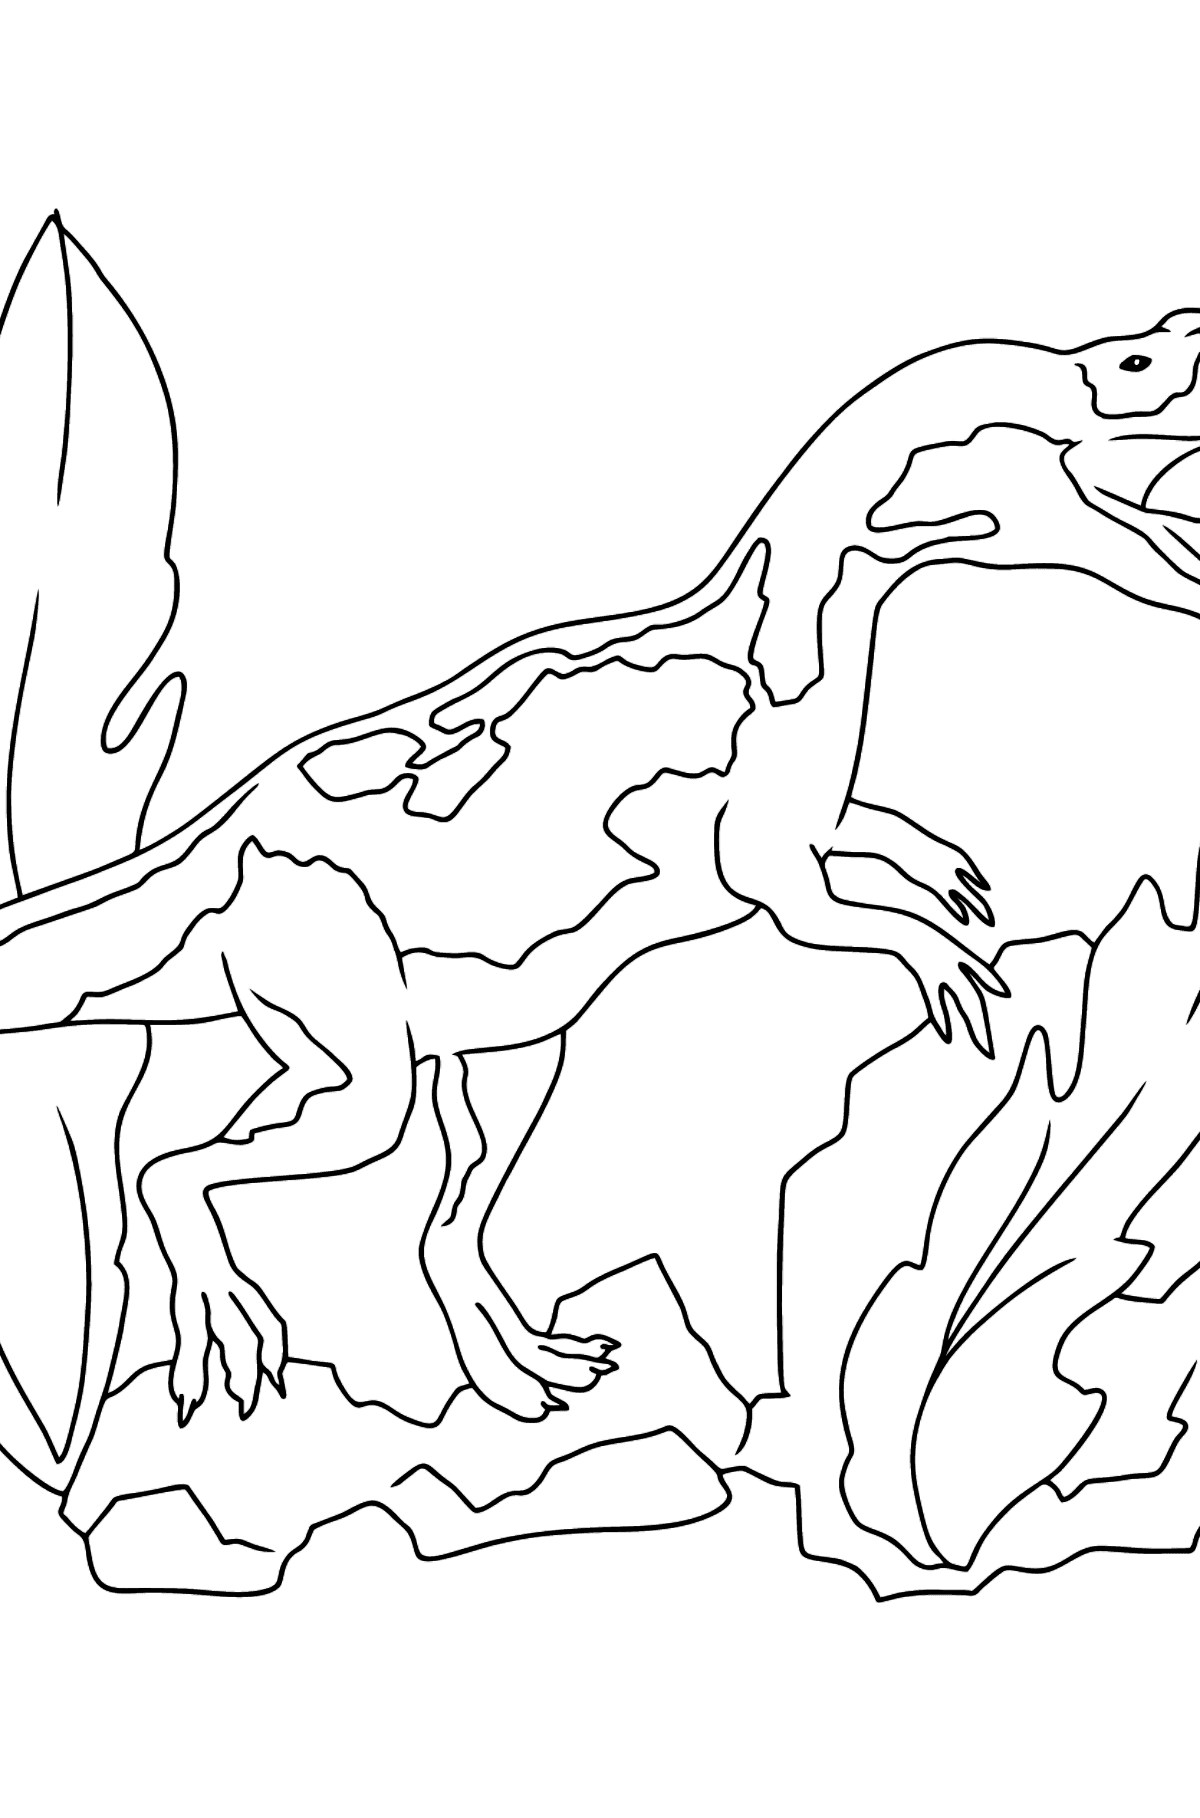 Jurassic Dinosaur Coloring Page (simple) - Coloring Pages for Kids